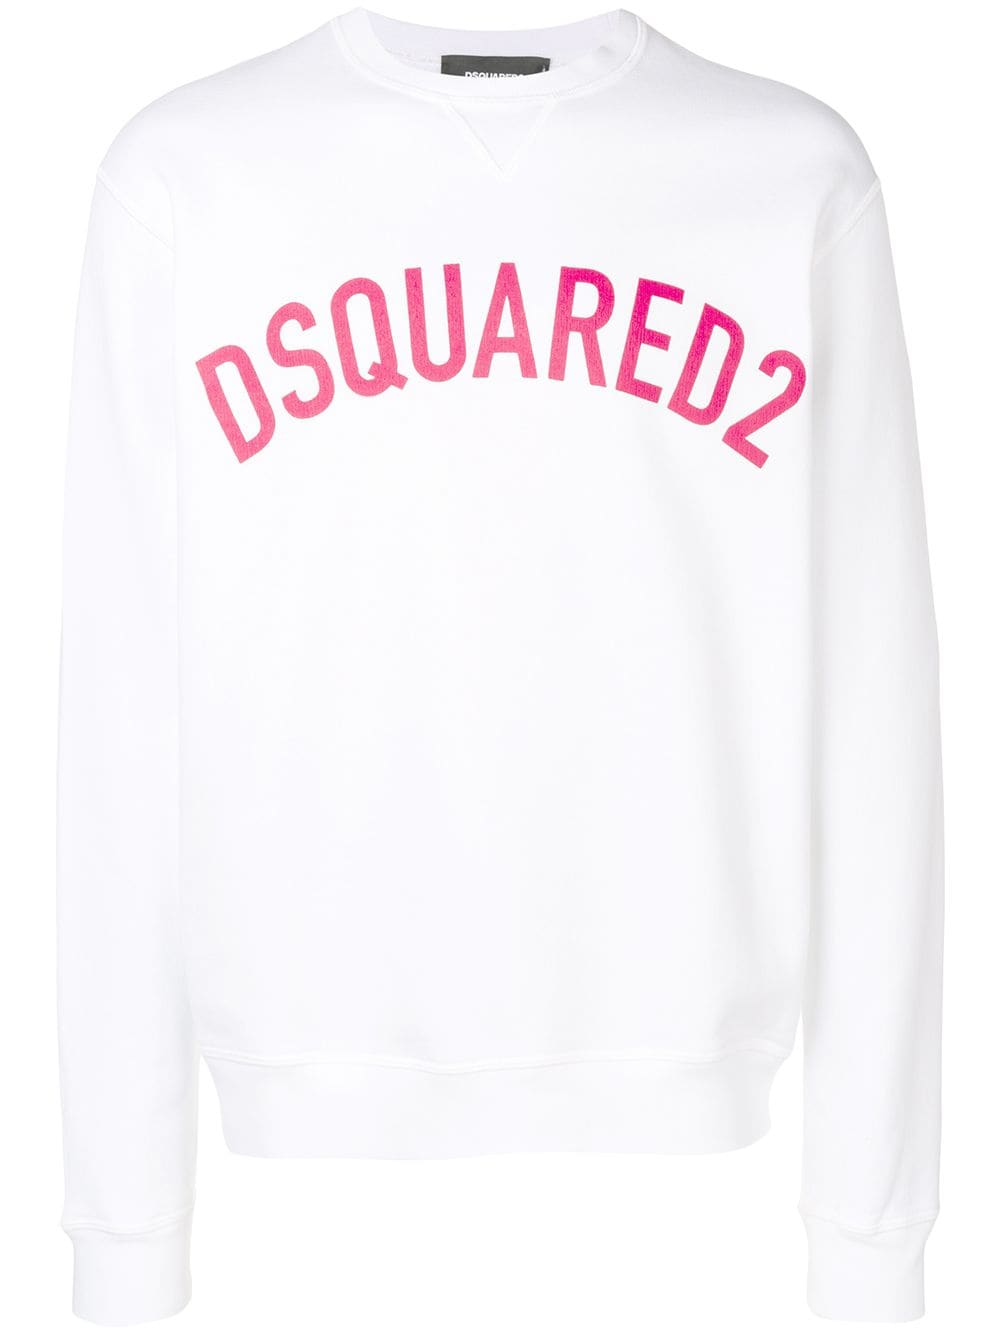 dsquared2 hoodie price